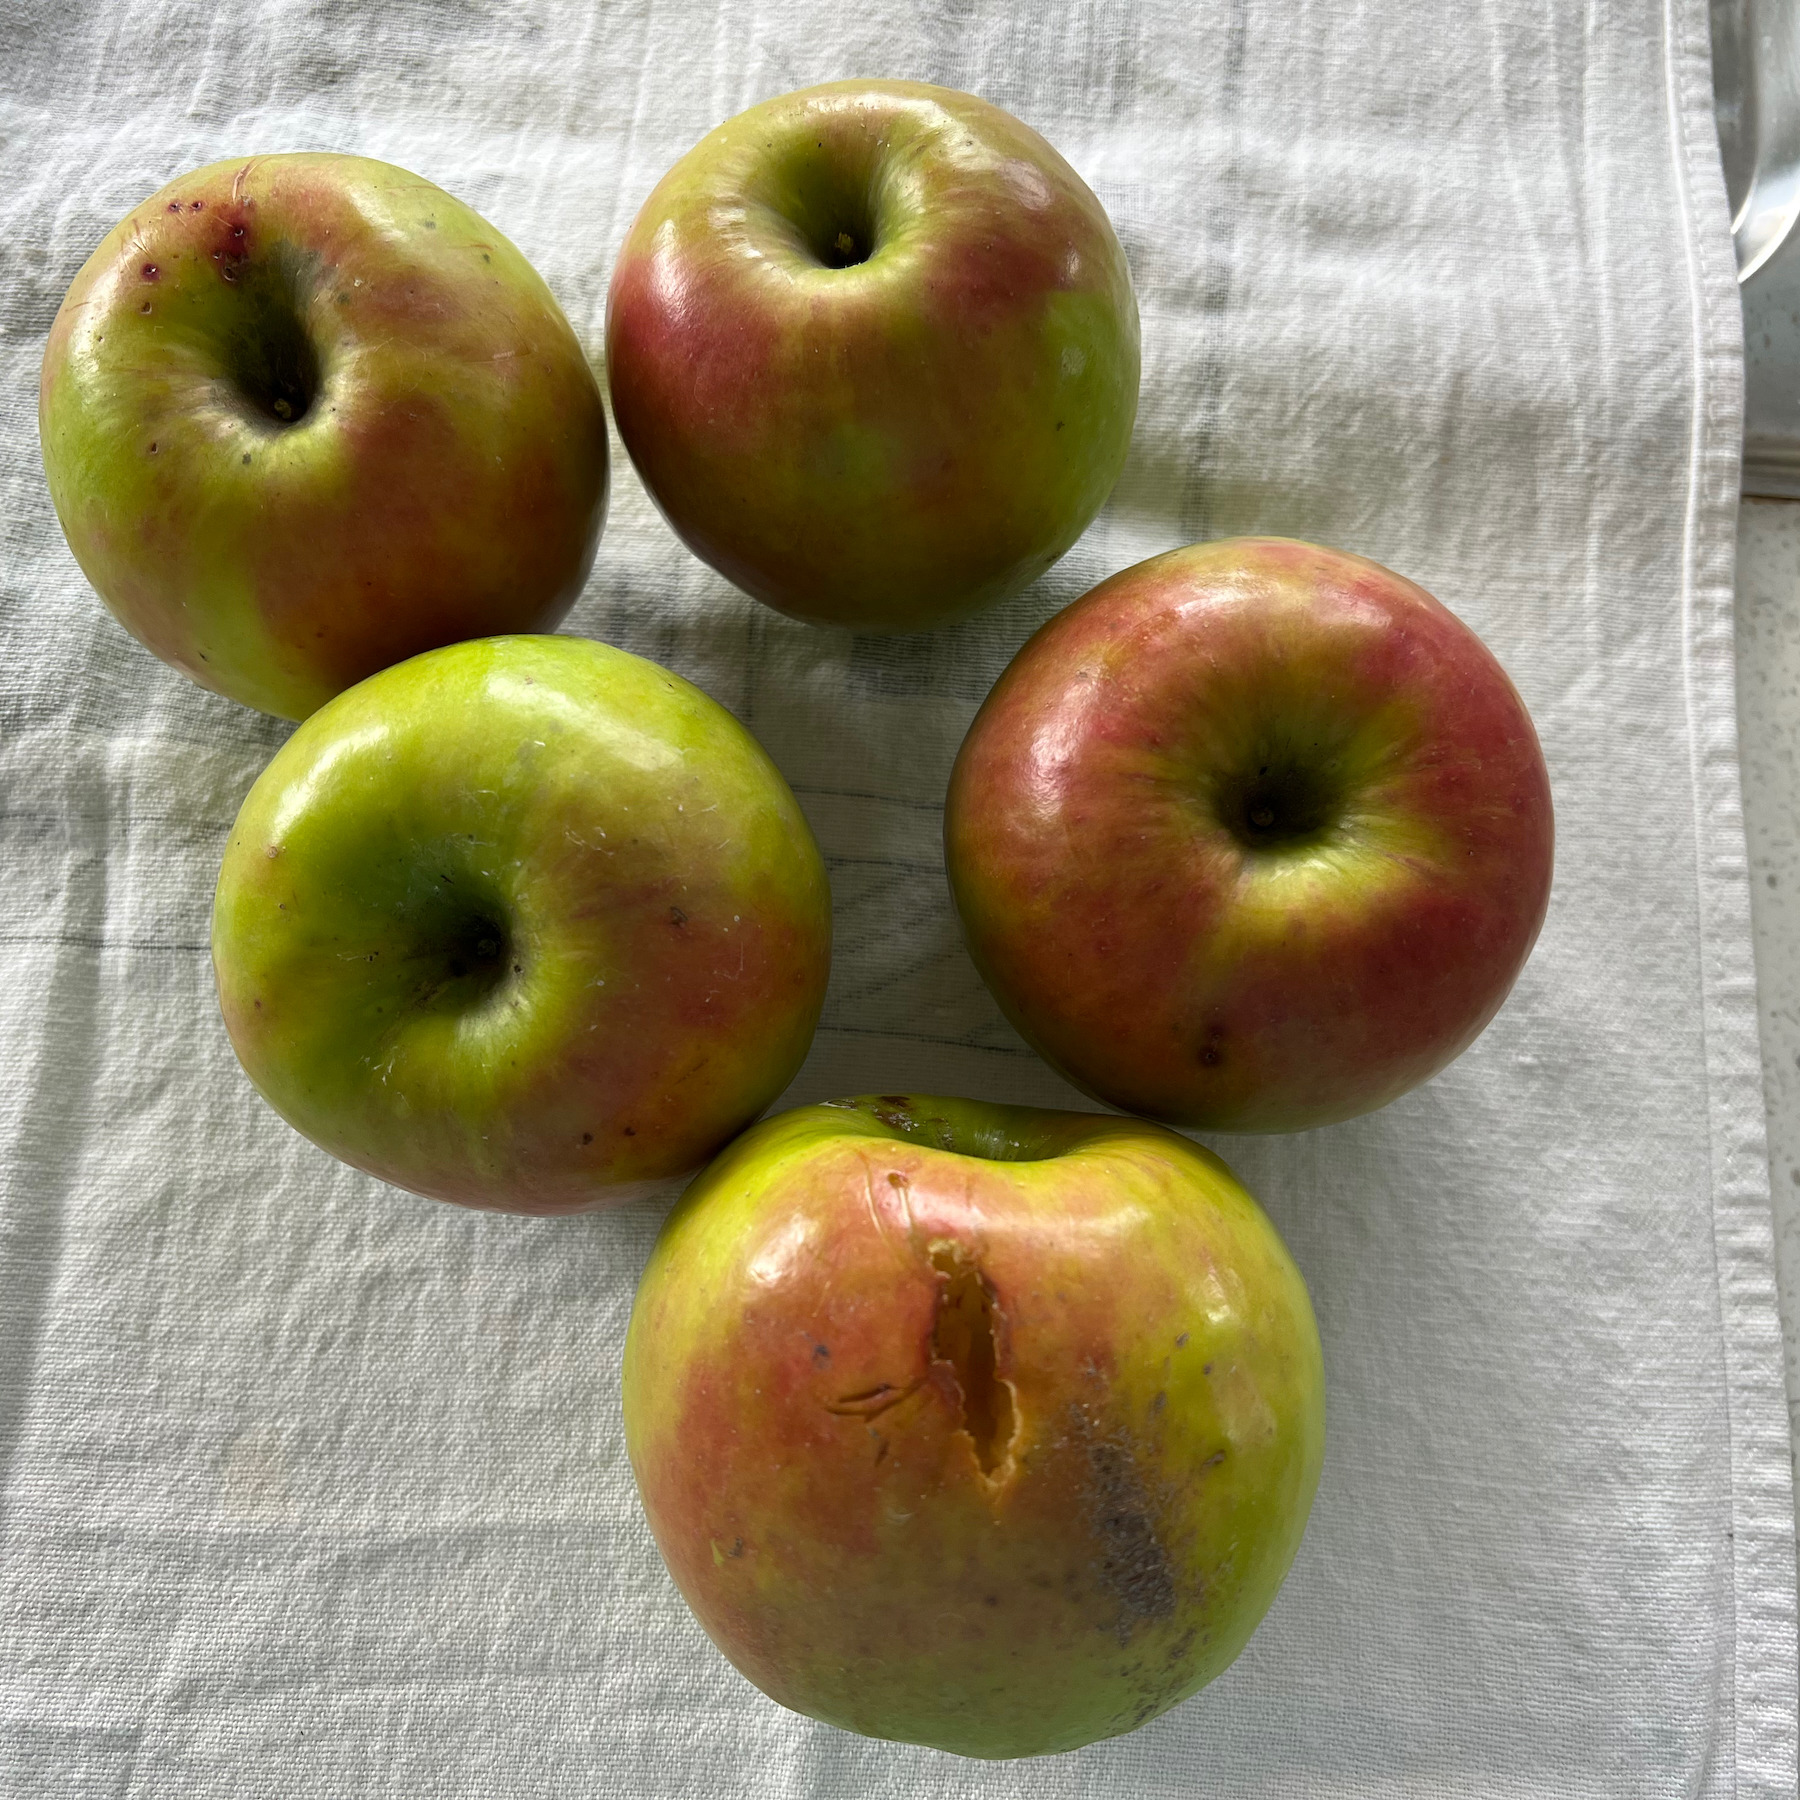 5 large green and red apples on a cloth; one has been pecked by a bird. 